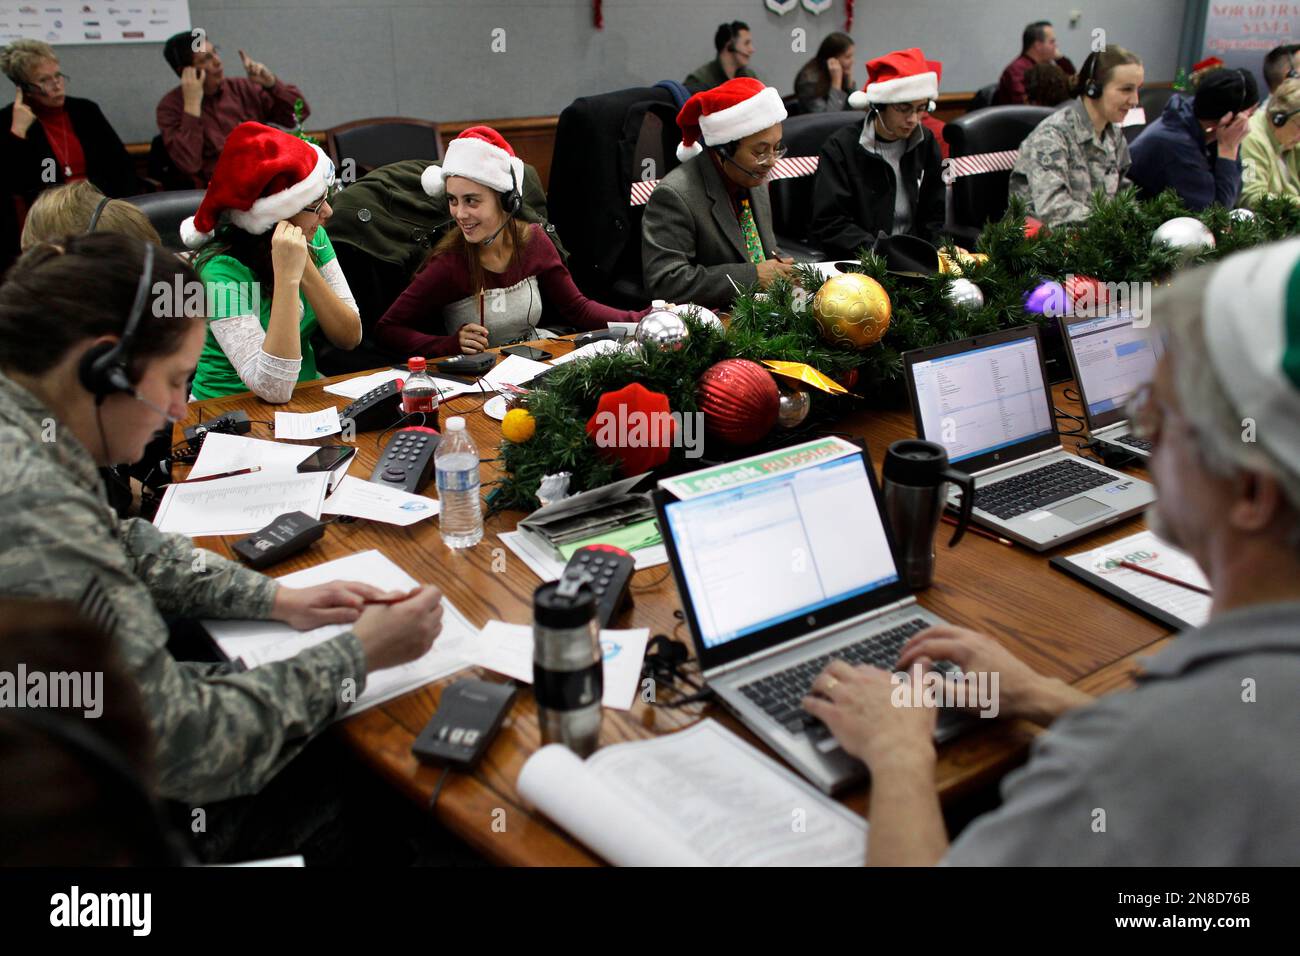 Lizzie Solano, center, and her sister Sarah take phone calls from children asking where Santa is and when he will deliver presents to their house, during the fifth annual NORAD Tracks Santa Operation, at the North American Aerospace Defense Command, or NORAD, at Peterson Air Force Base, in Colorado Springs, Colo., Monday Dec. 24, 2012. Over a thousand volunteers at NORAD handle more than 100,000 thousand phone calls from children around the world every Christmas Eve, when NORAD continually projects Santa Claus's supposed progress delivering presents. (AP Photo/Brennan Linsley) Stock Photo